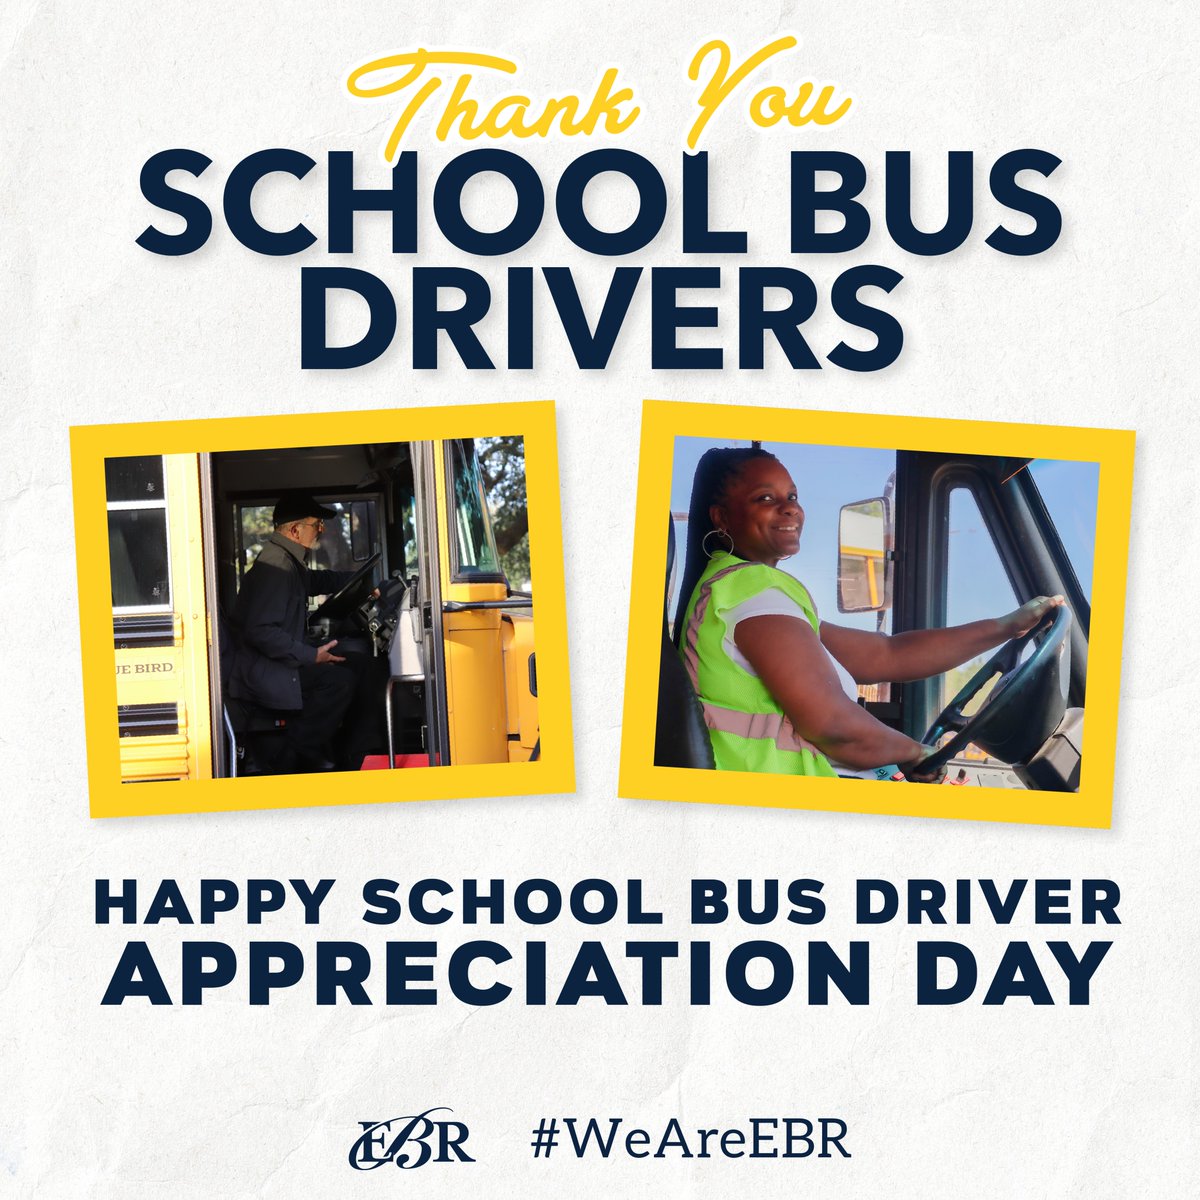 It's Bus Driver Appreciation Day!! Let's take a moment to appreciate and support those who ensure our kids reach school safely. Thank you for your hard work and dedication! 🙌 🚌 #SchoolBusDrivers #WeAreEBR